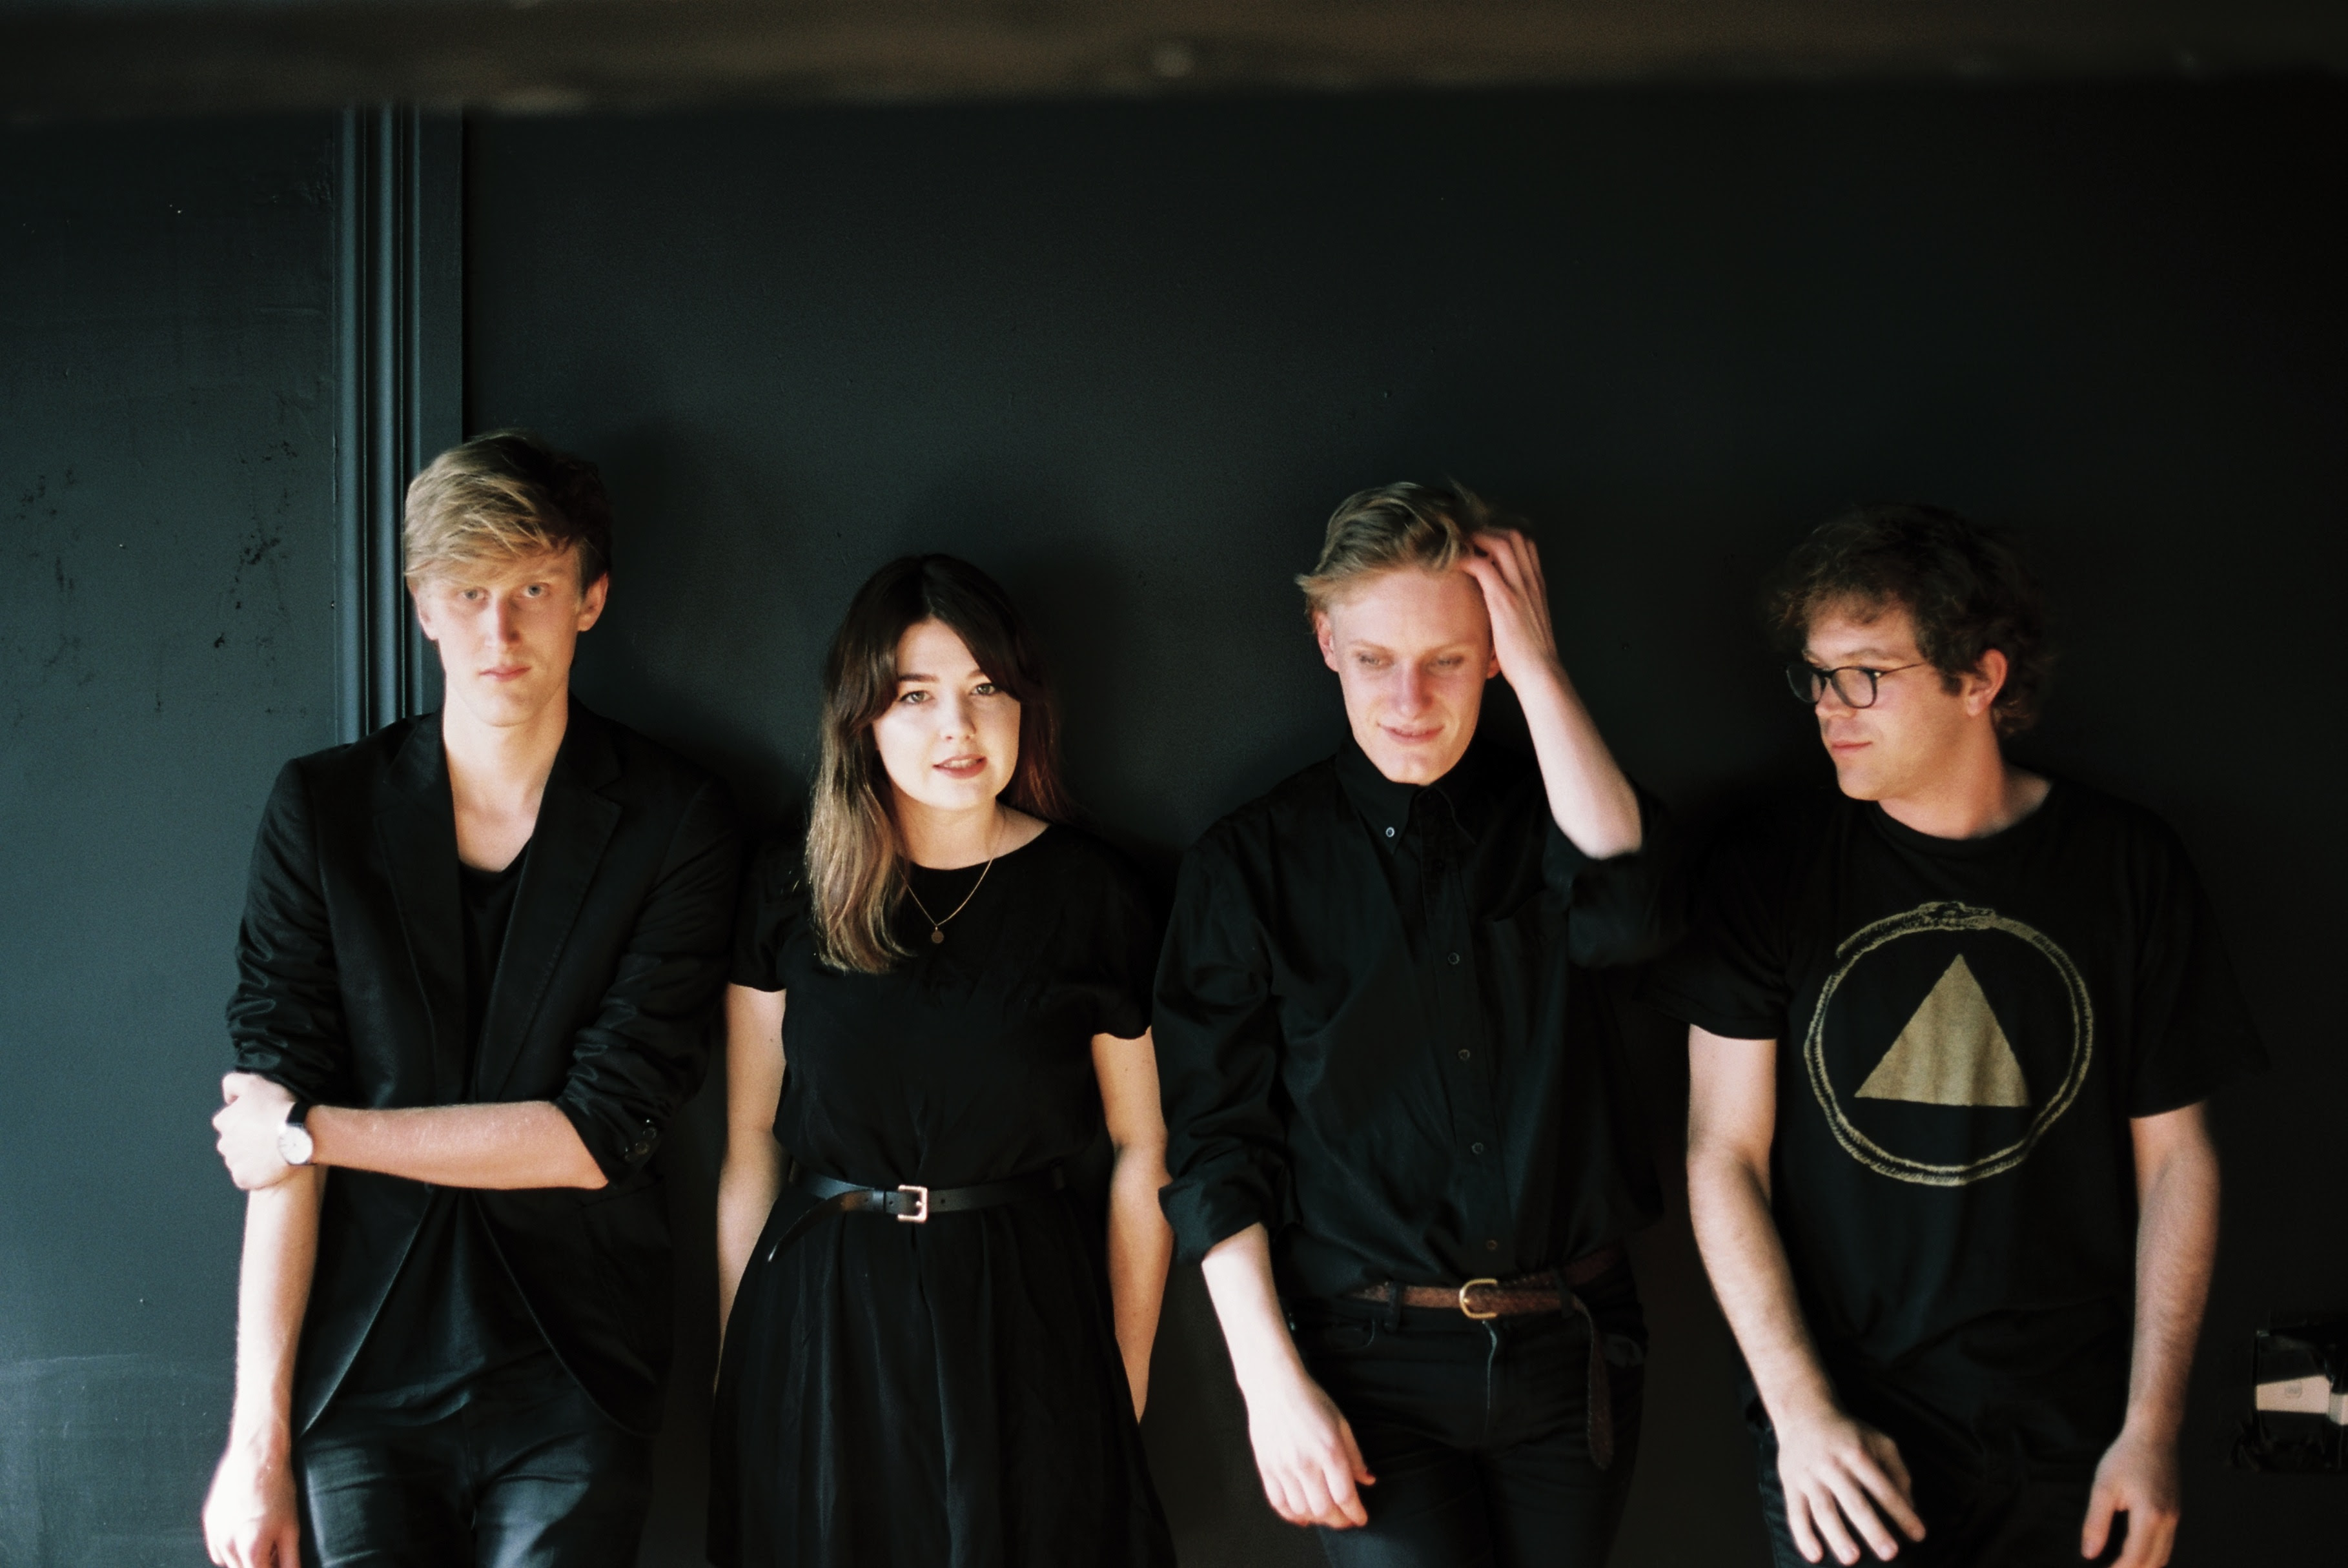 Yumi Zouma stream their Debut Album 'Yoncalla,' ahead of it's May 27th release on Cascine.